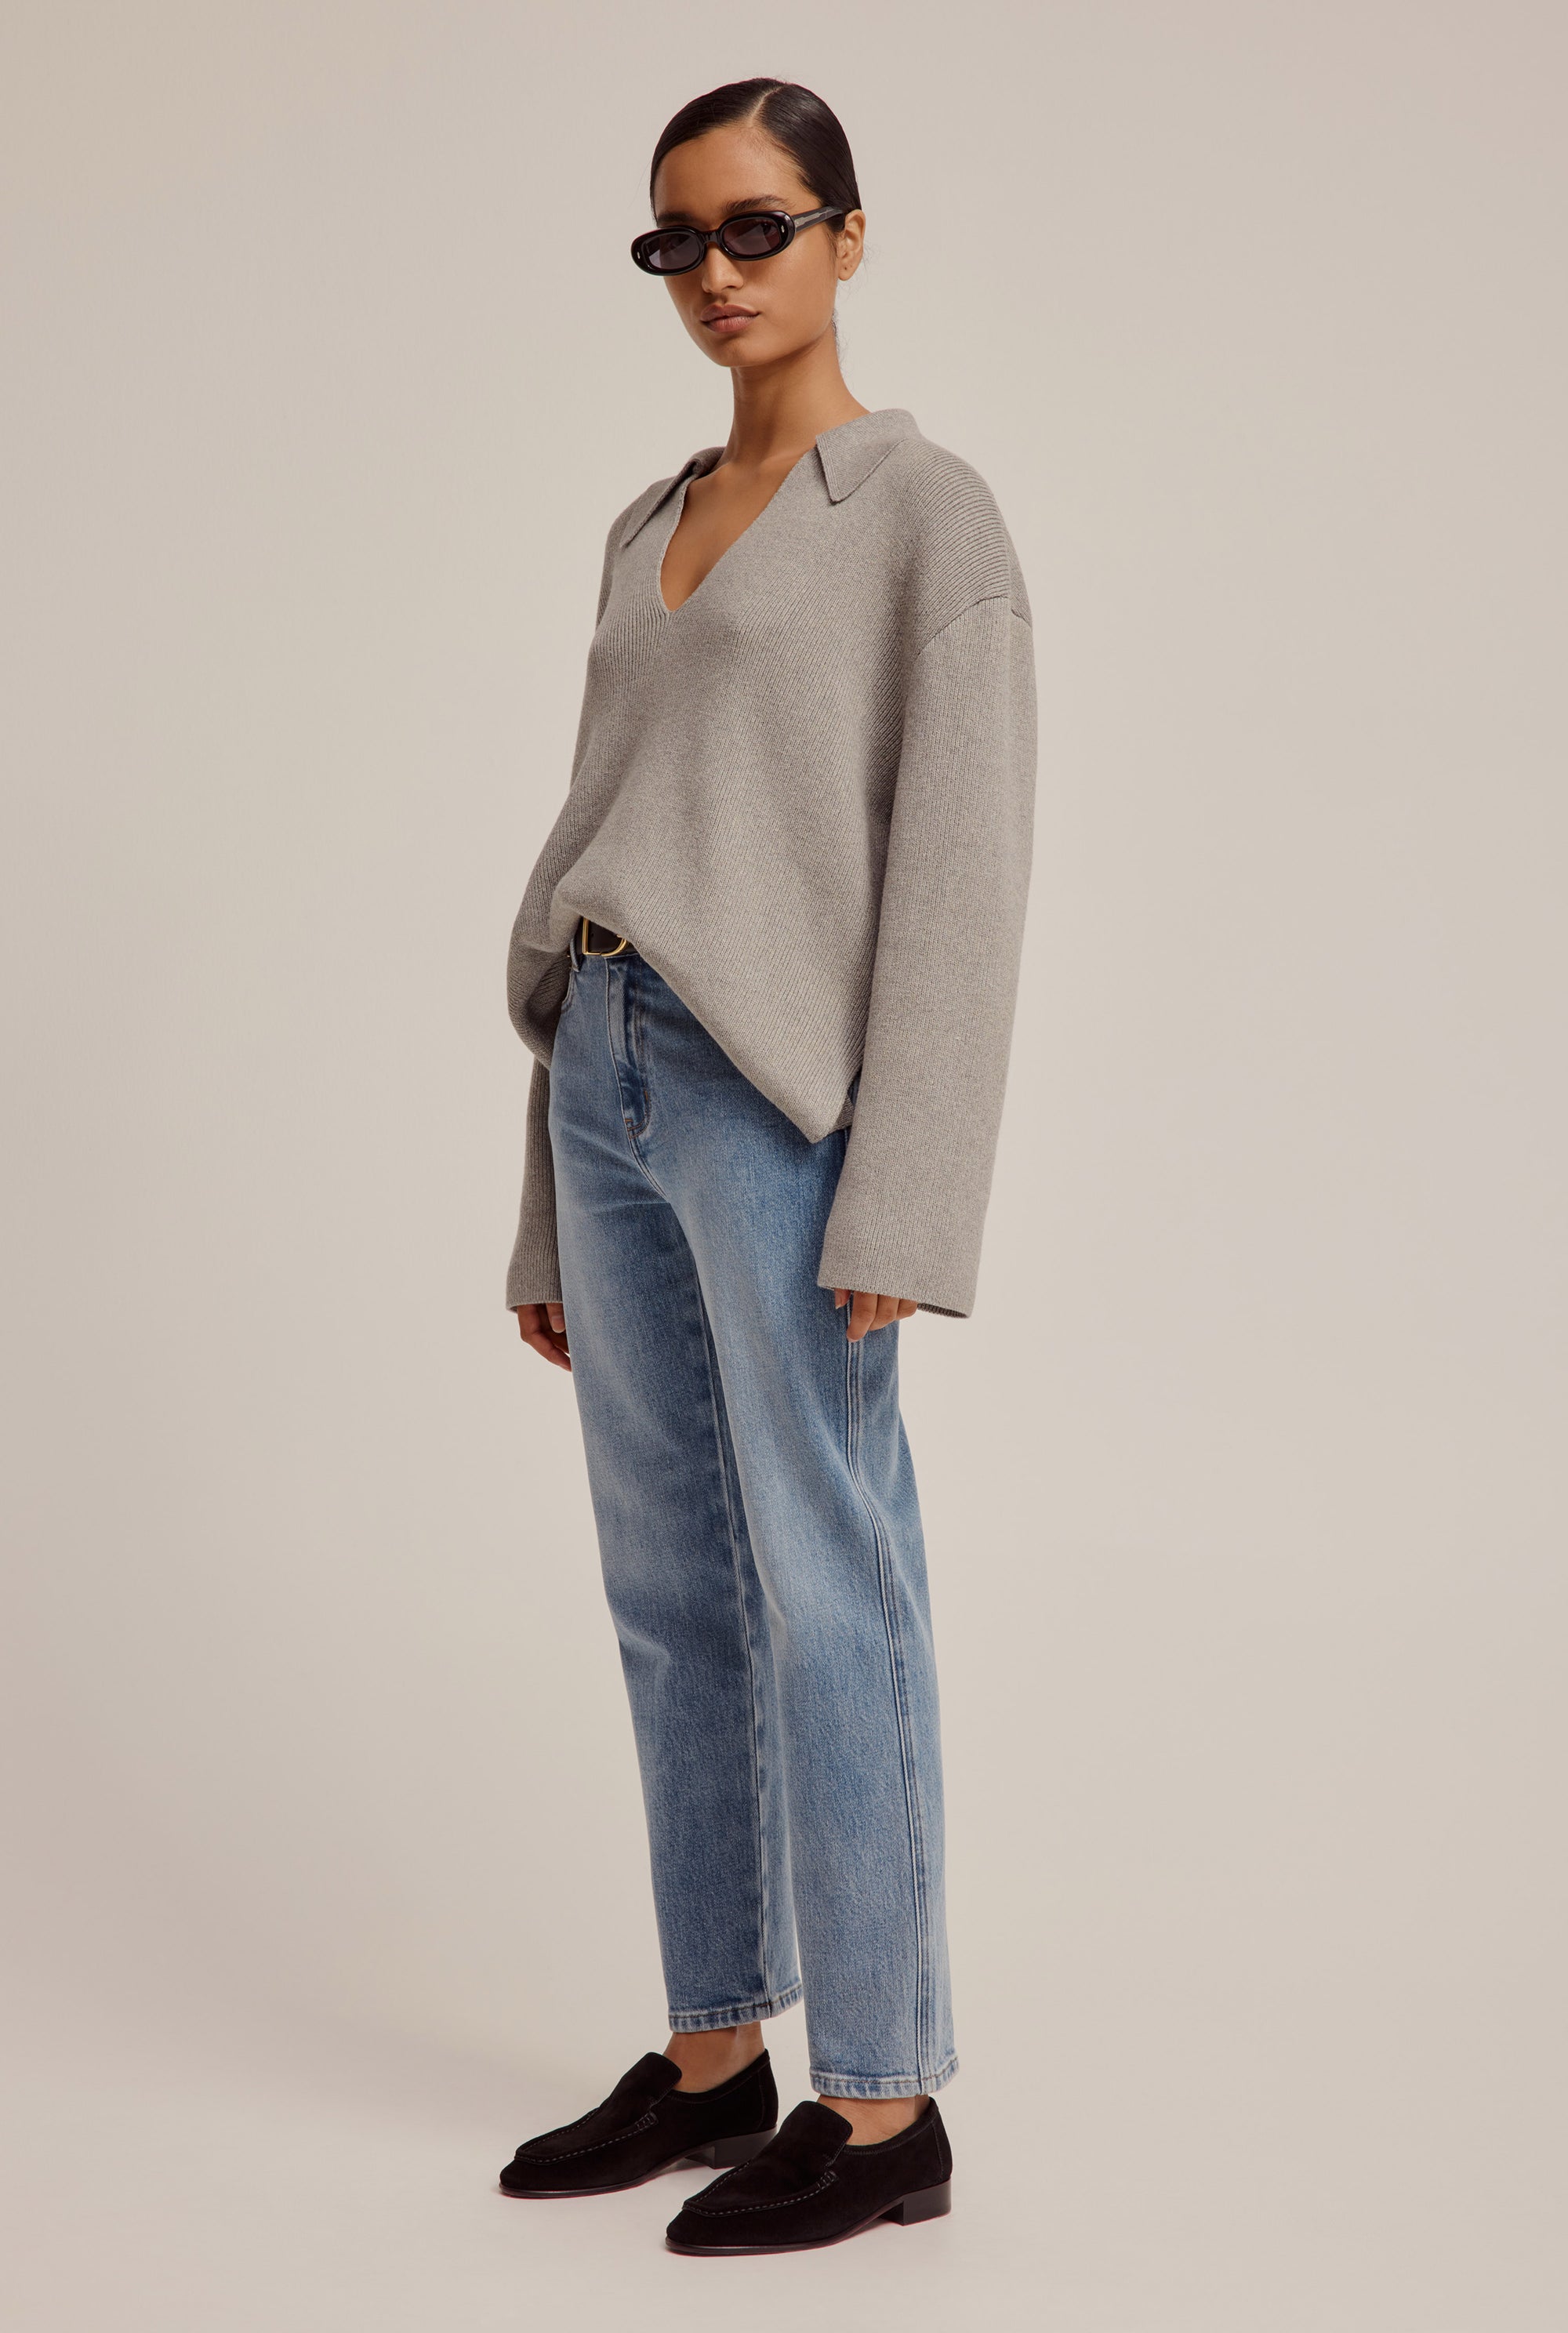 Cotton Cashmere Oversized Open Neck Sweater - Grey Marl